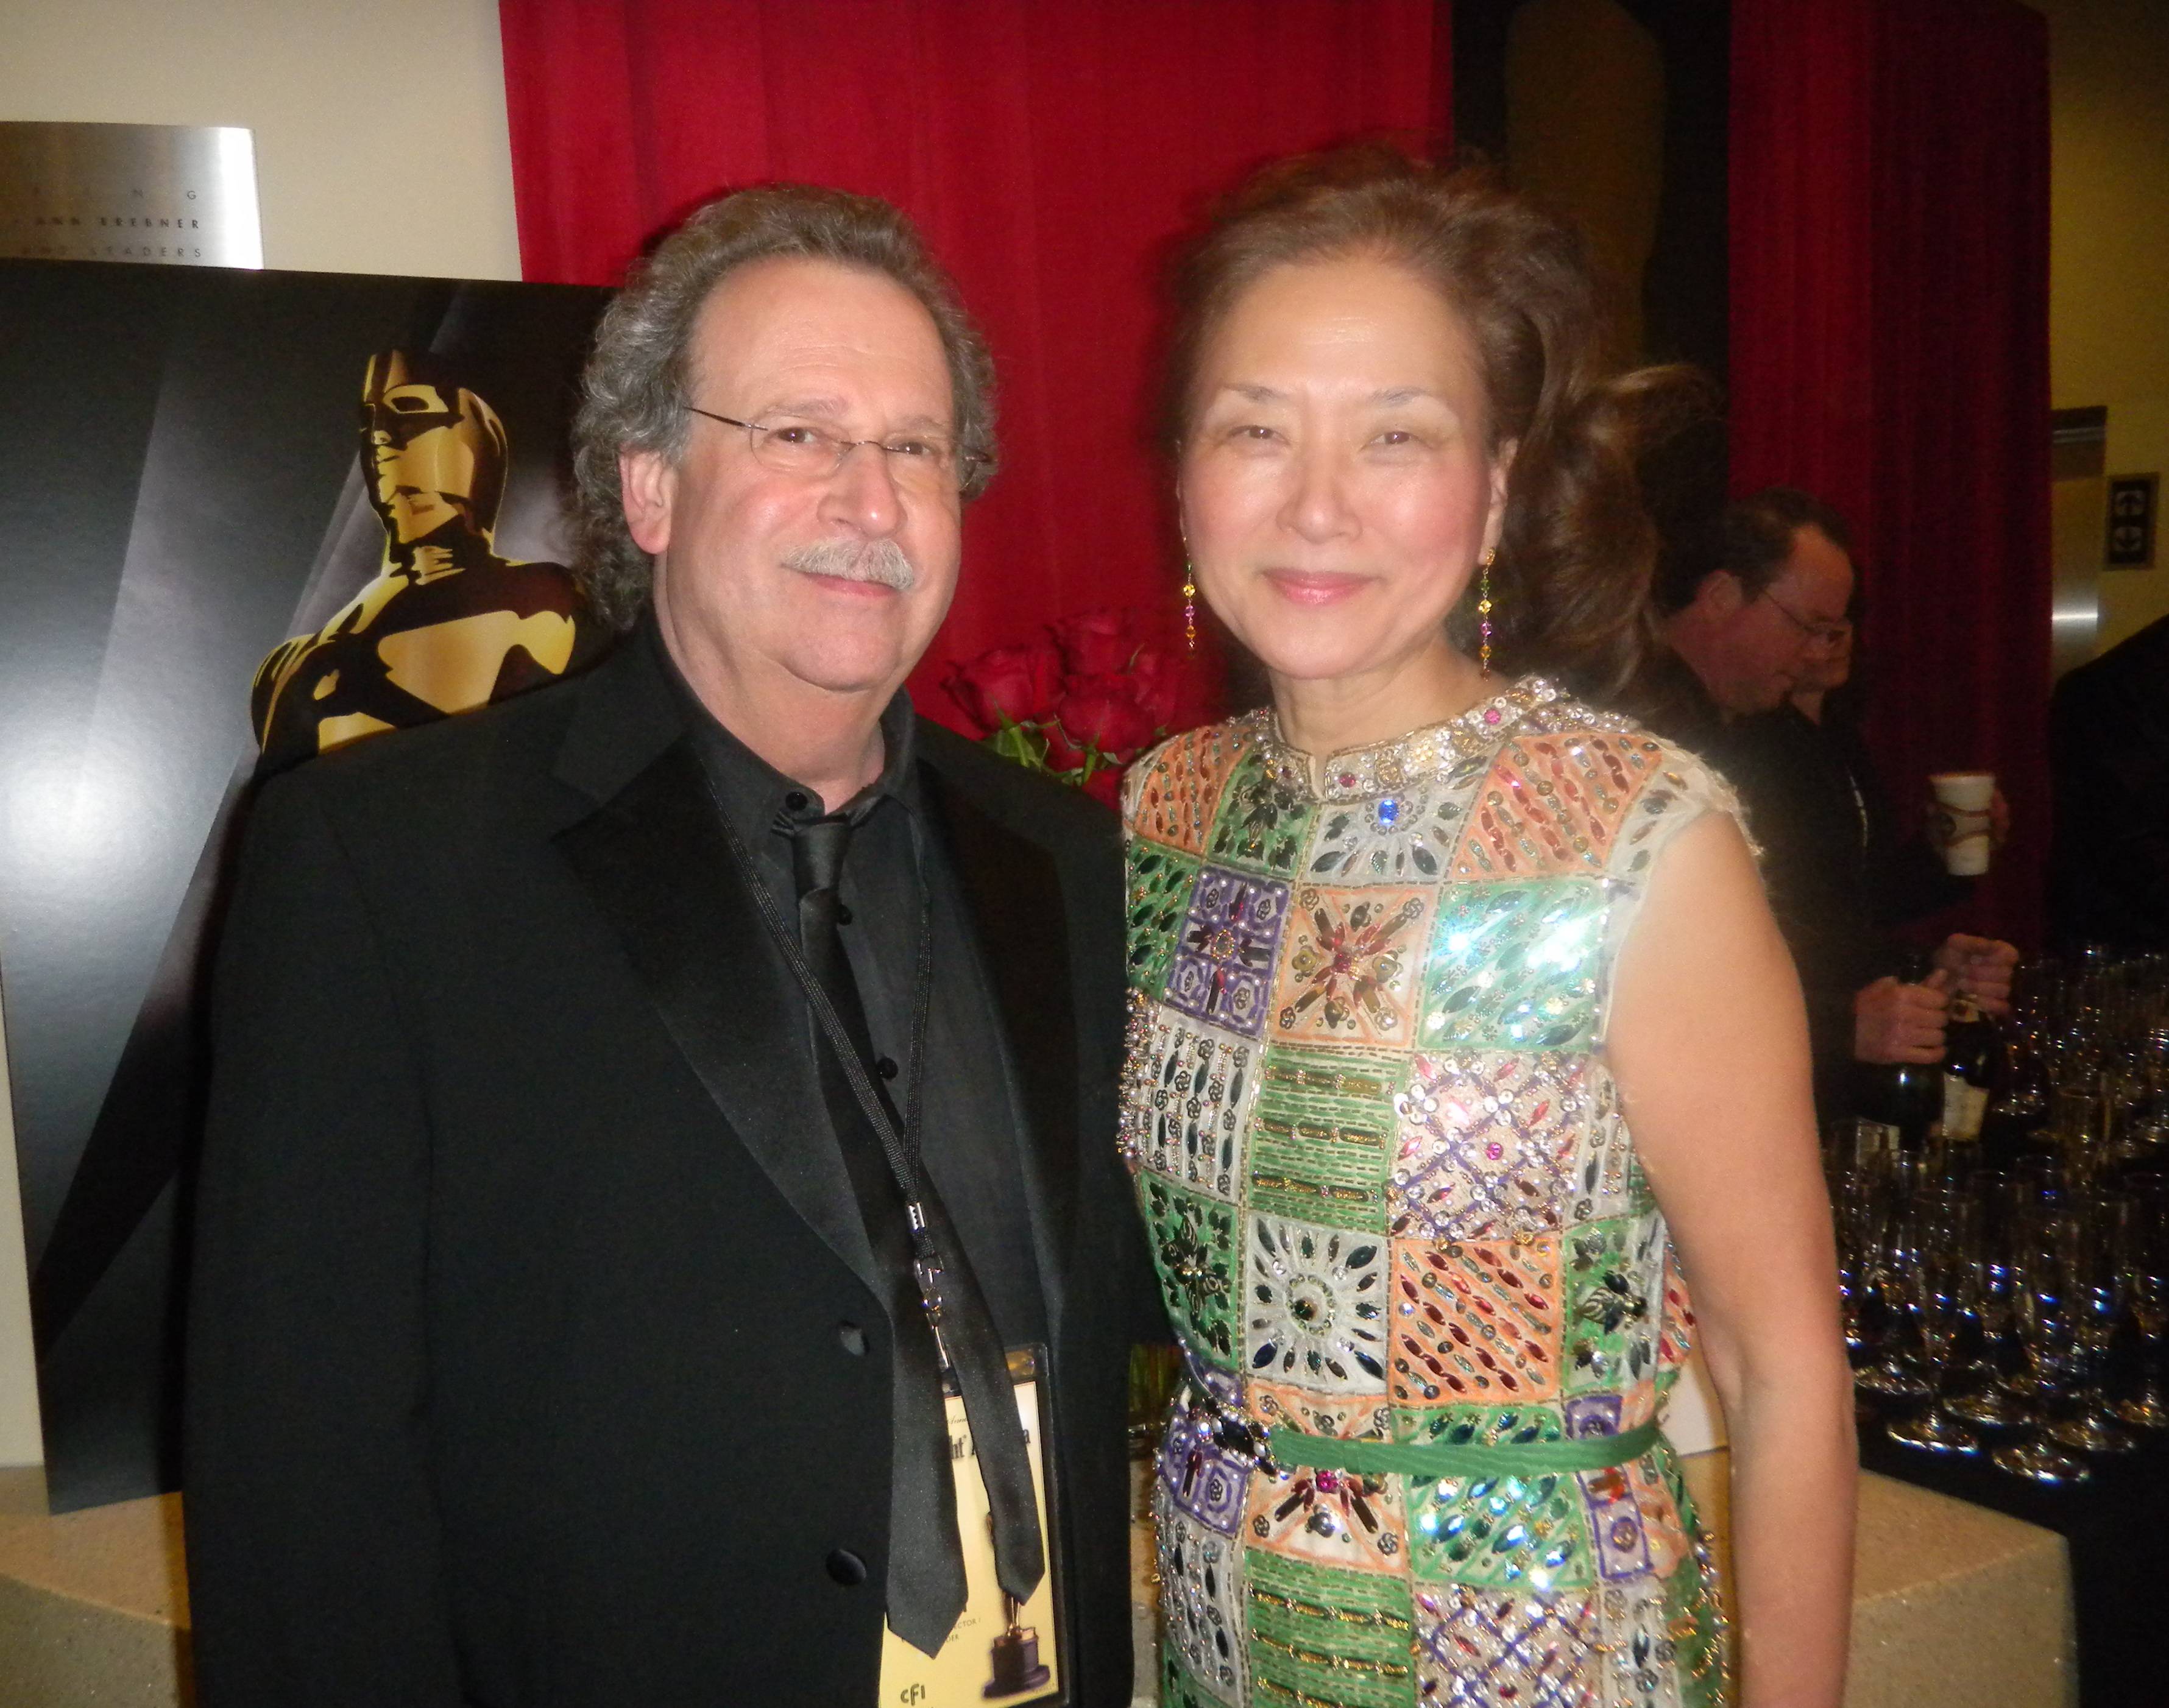 Olivia with Mark Fishkin, founder of CFI and Mill Valley Film Festival